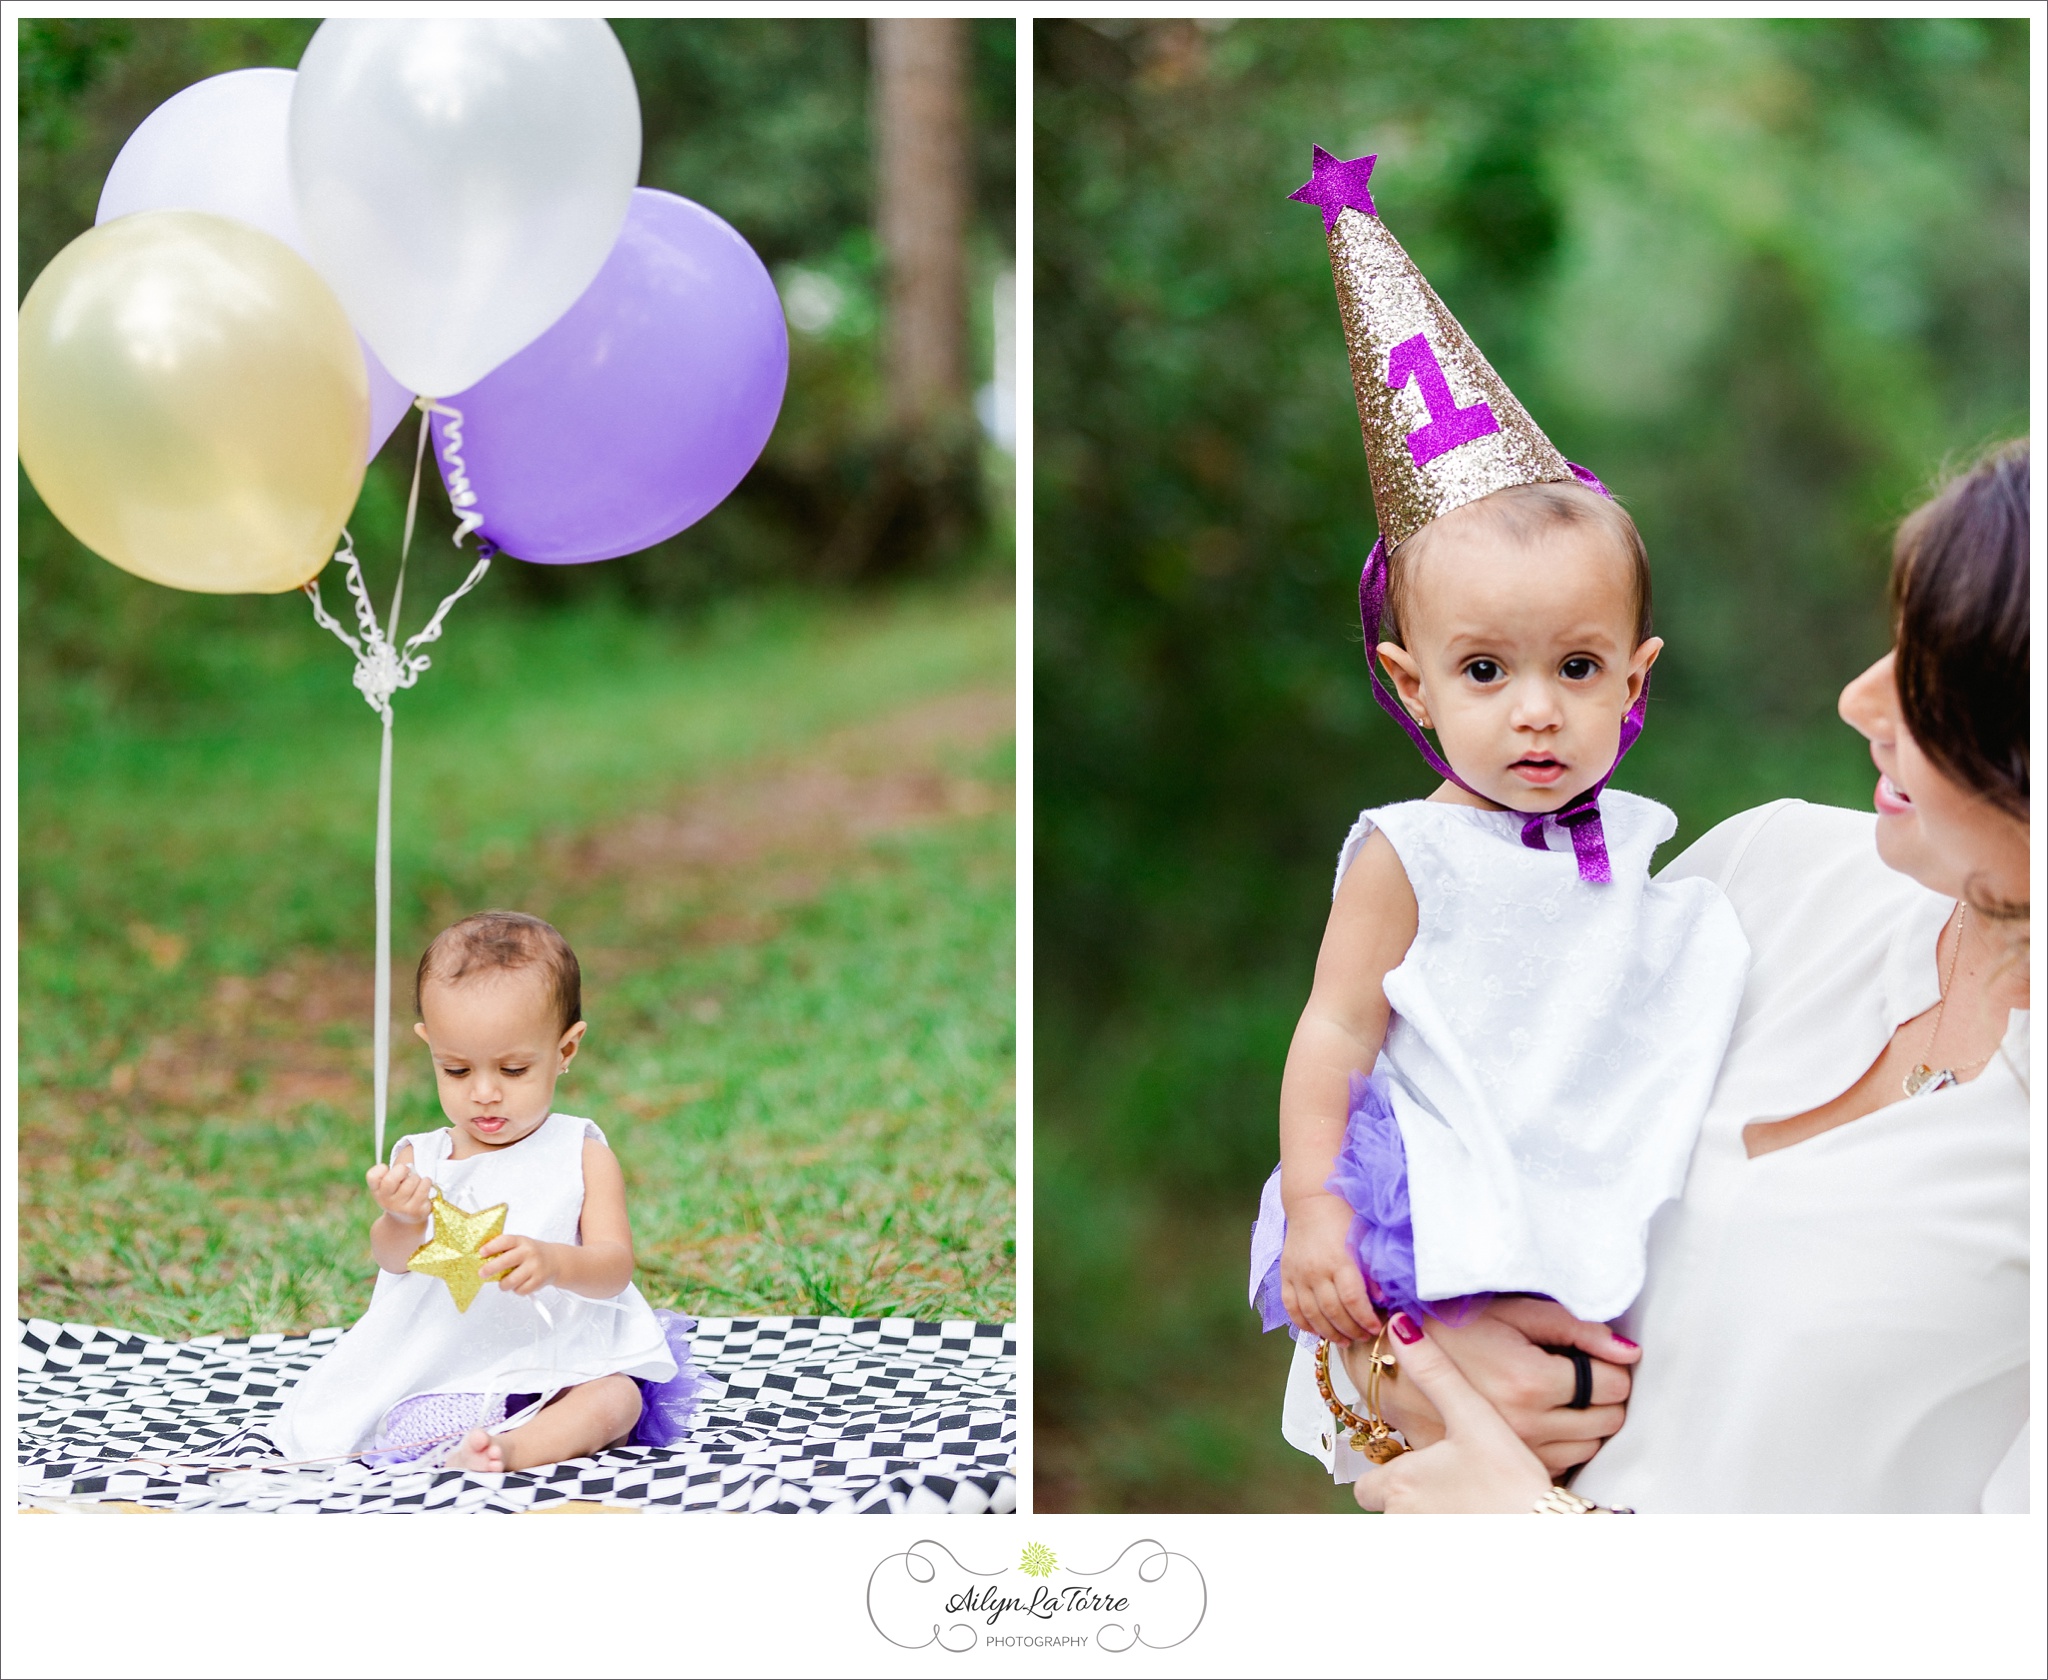 Tampa Family Photographer | © Ailyn La Torre Photography 2014